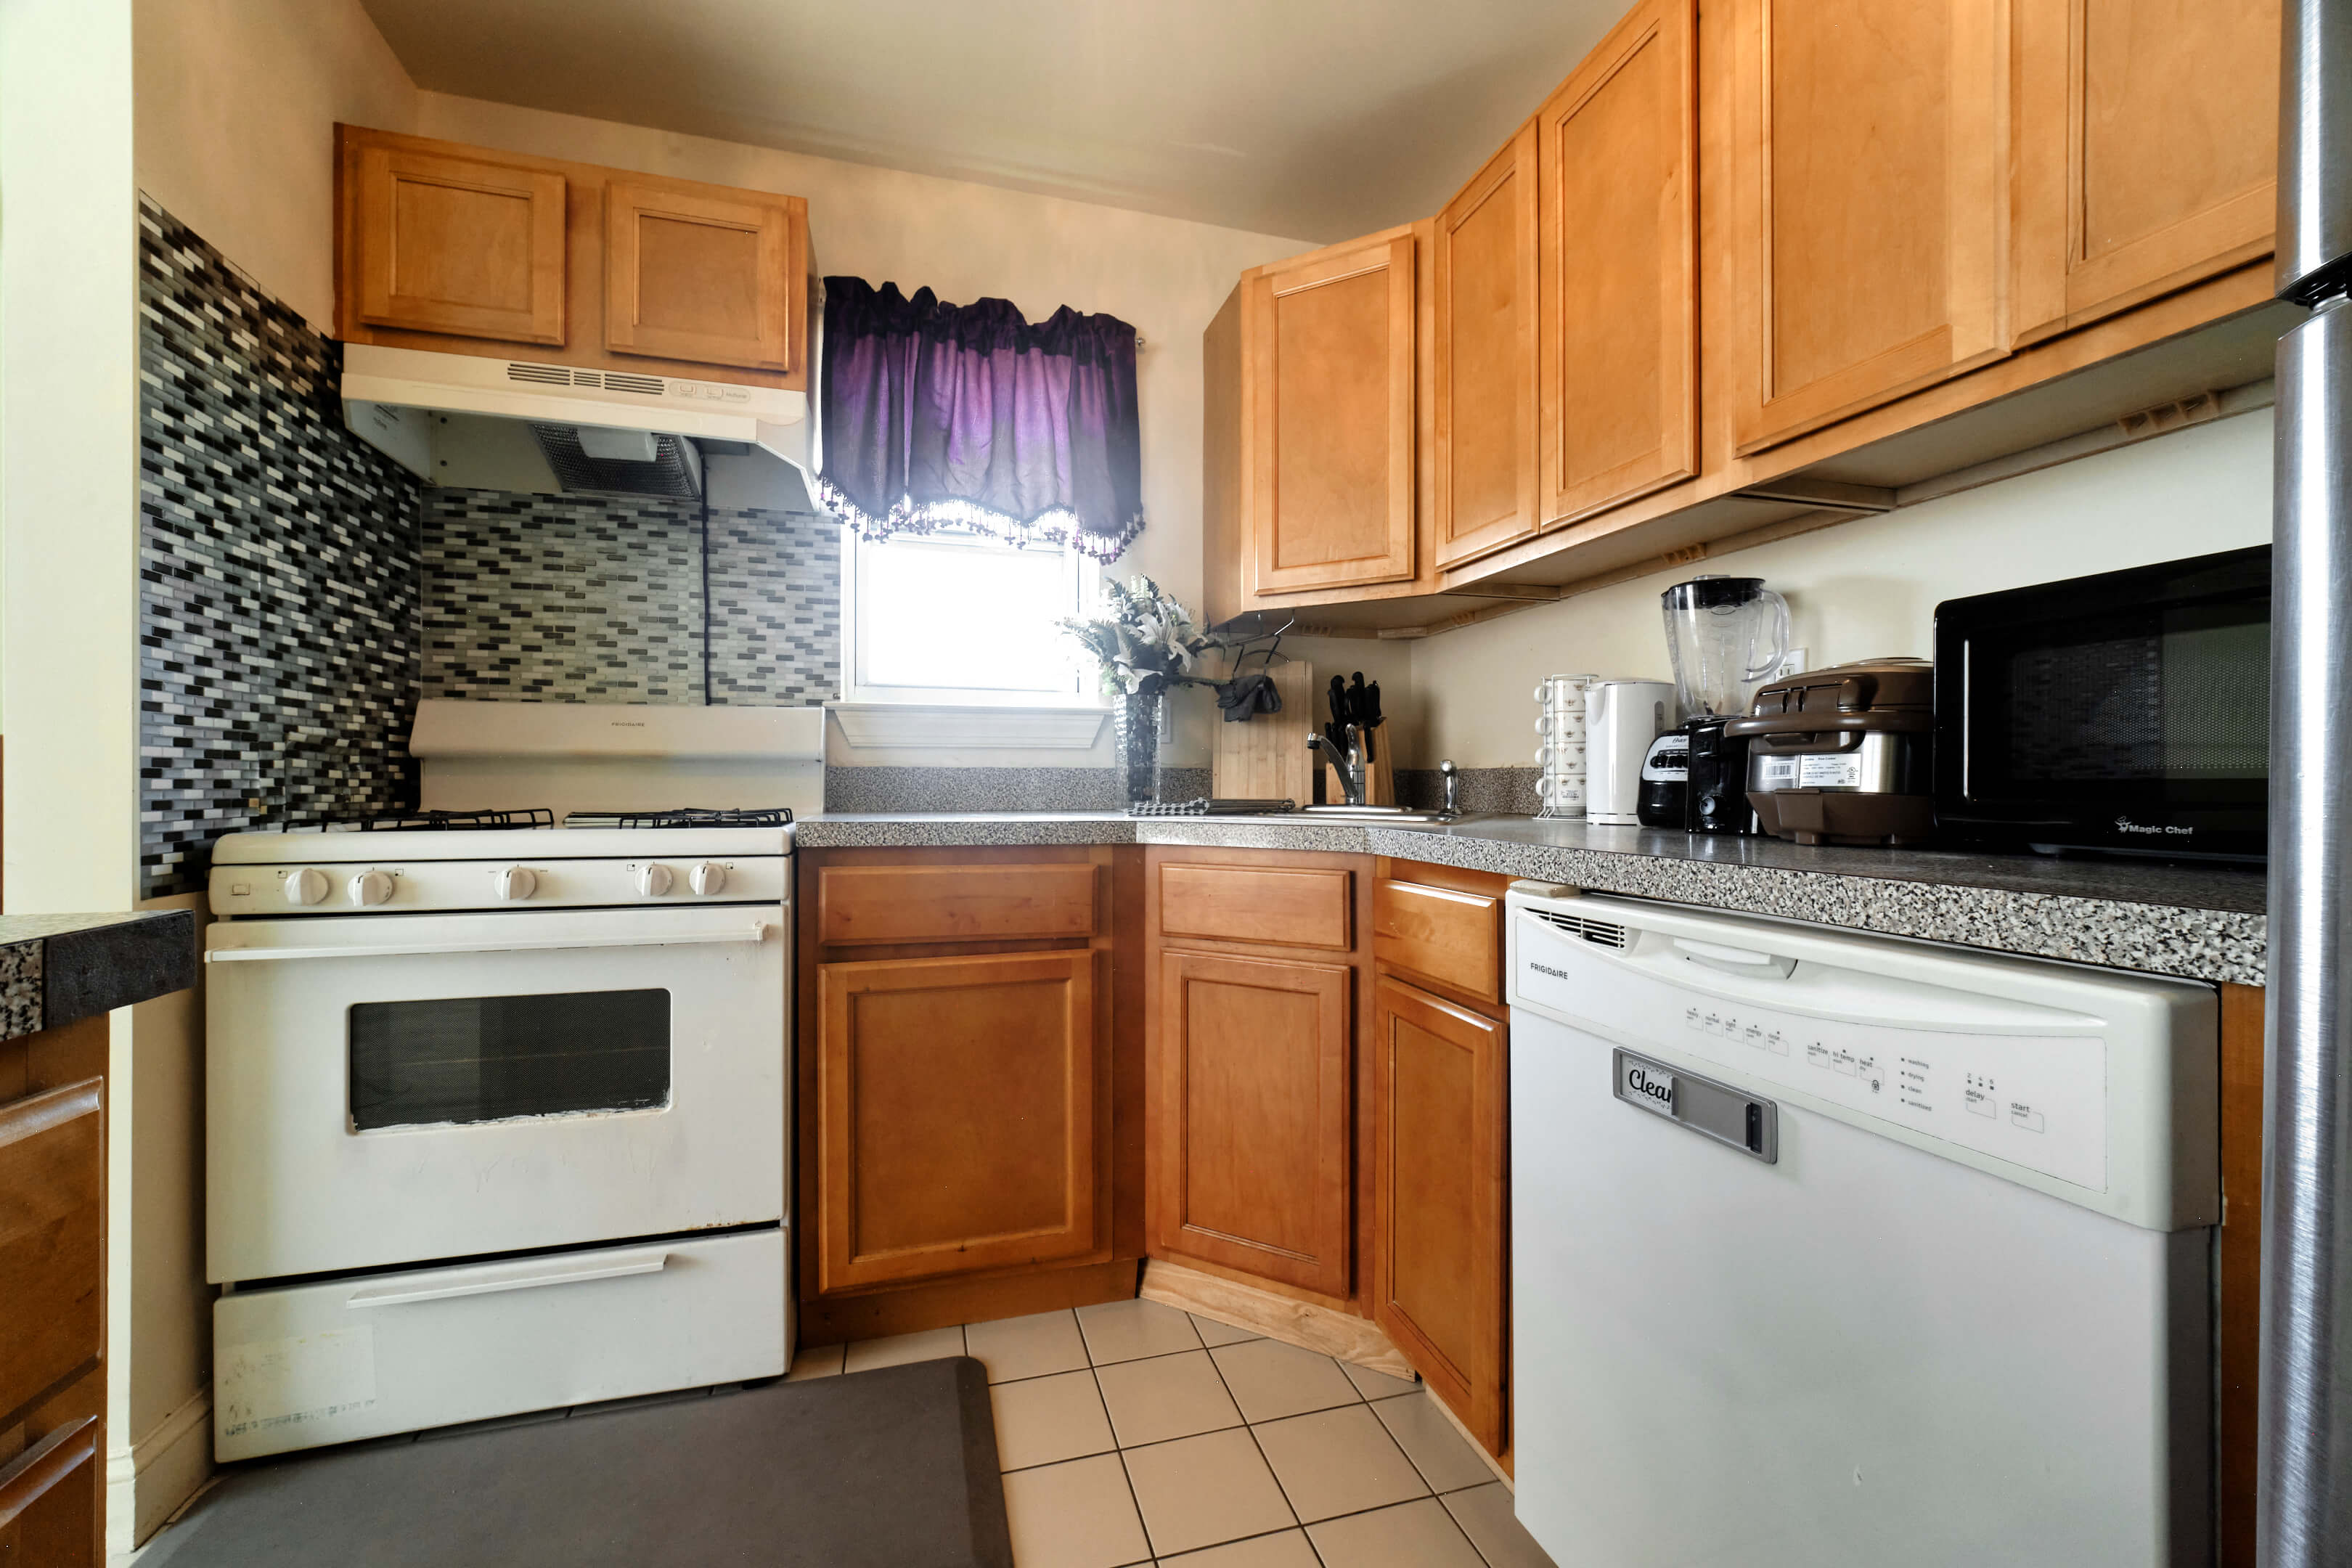 101 Dolphin Ct, Bronx, NY 10473 - Real Estate Photography, AirBnB Photography